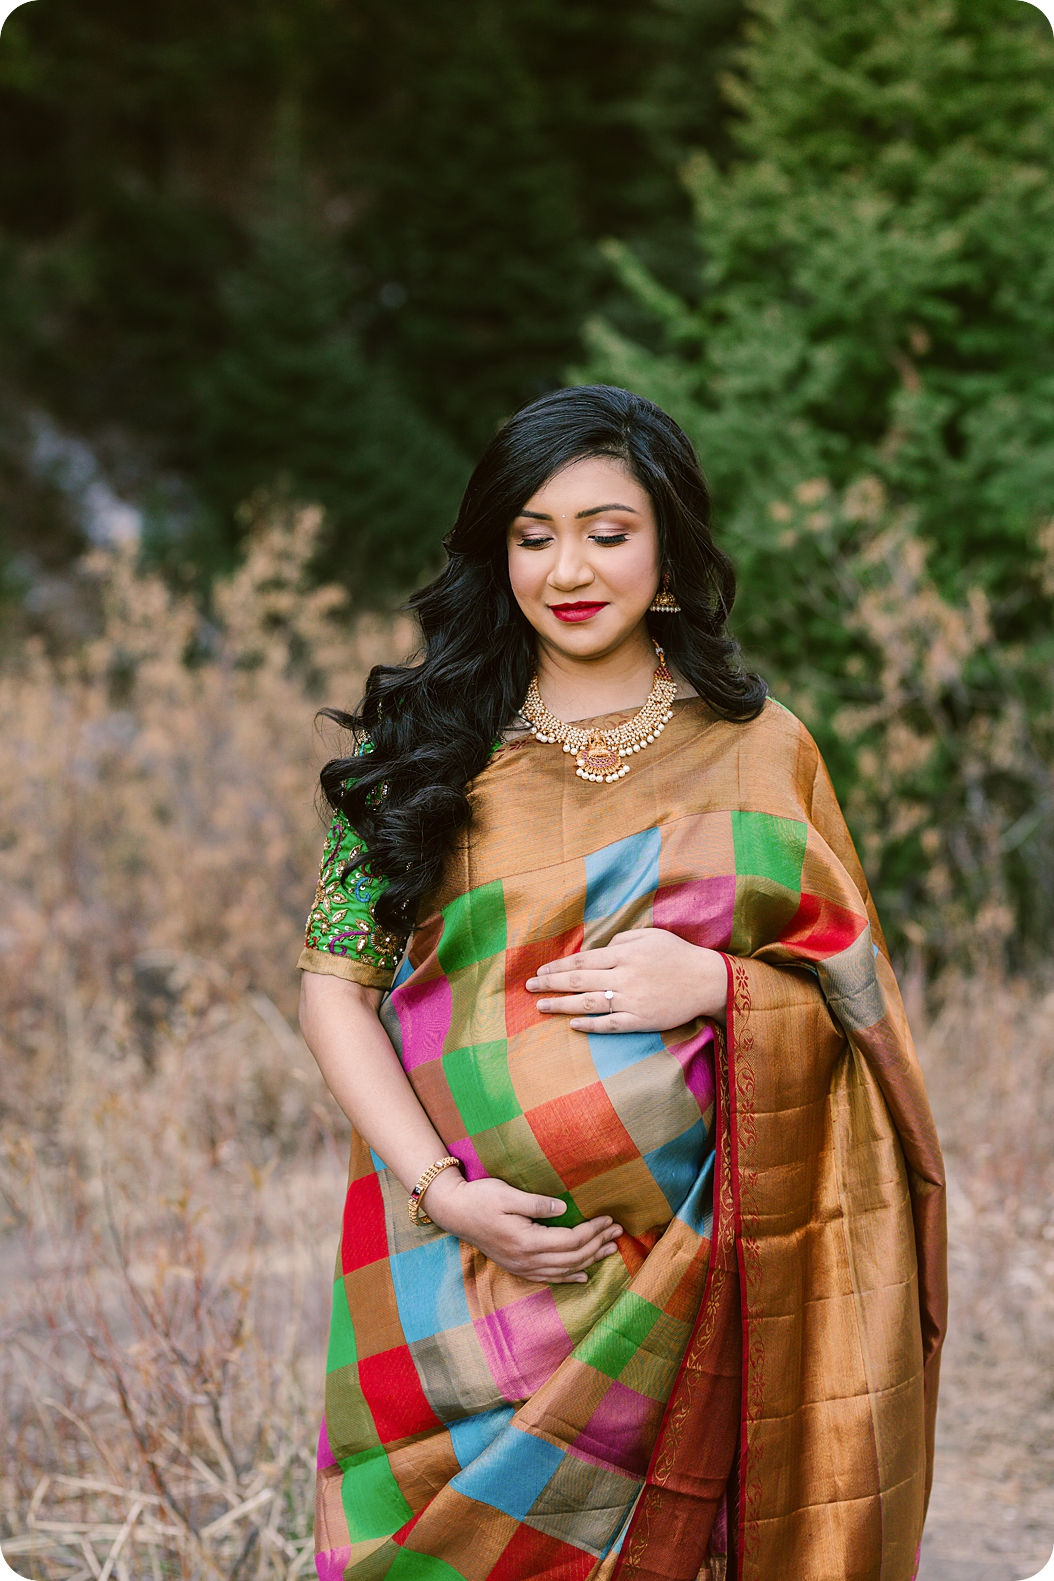 maternity session in Utah with traditional Indian dress photographed by Beka Price Photography